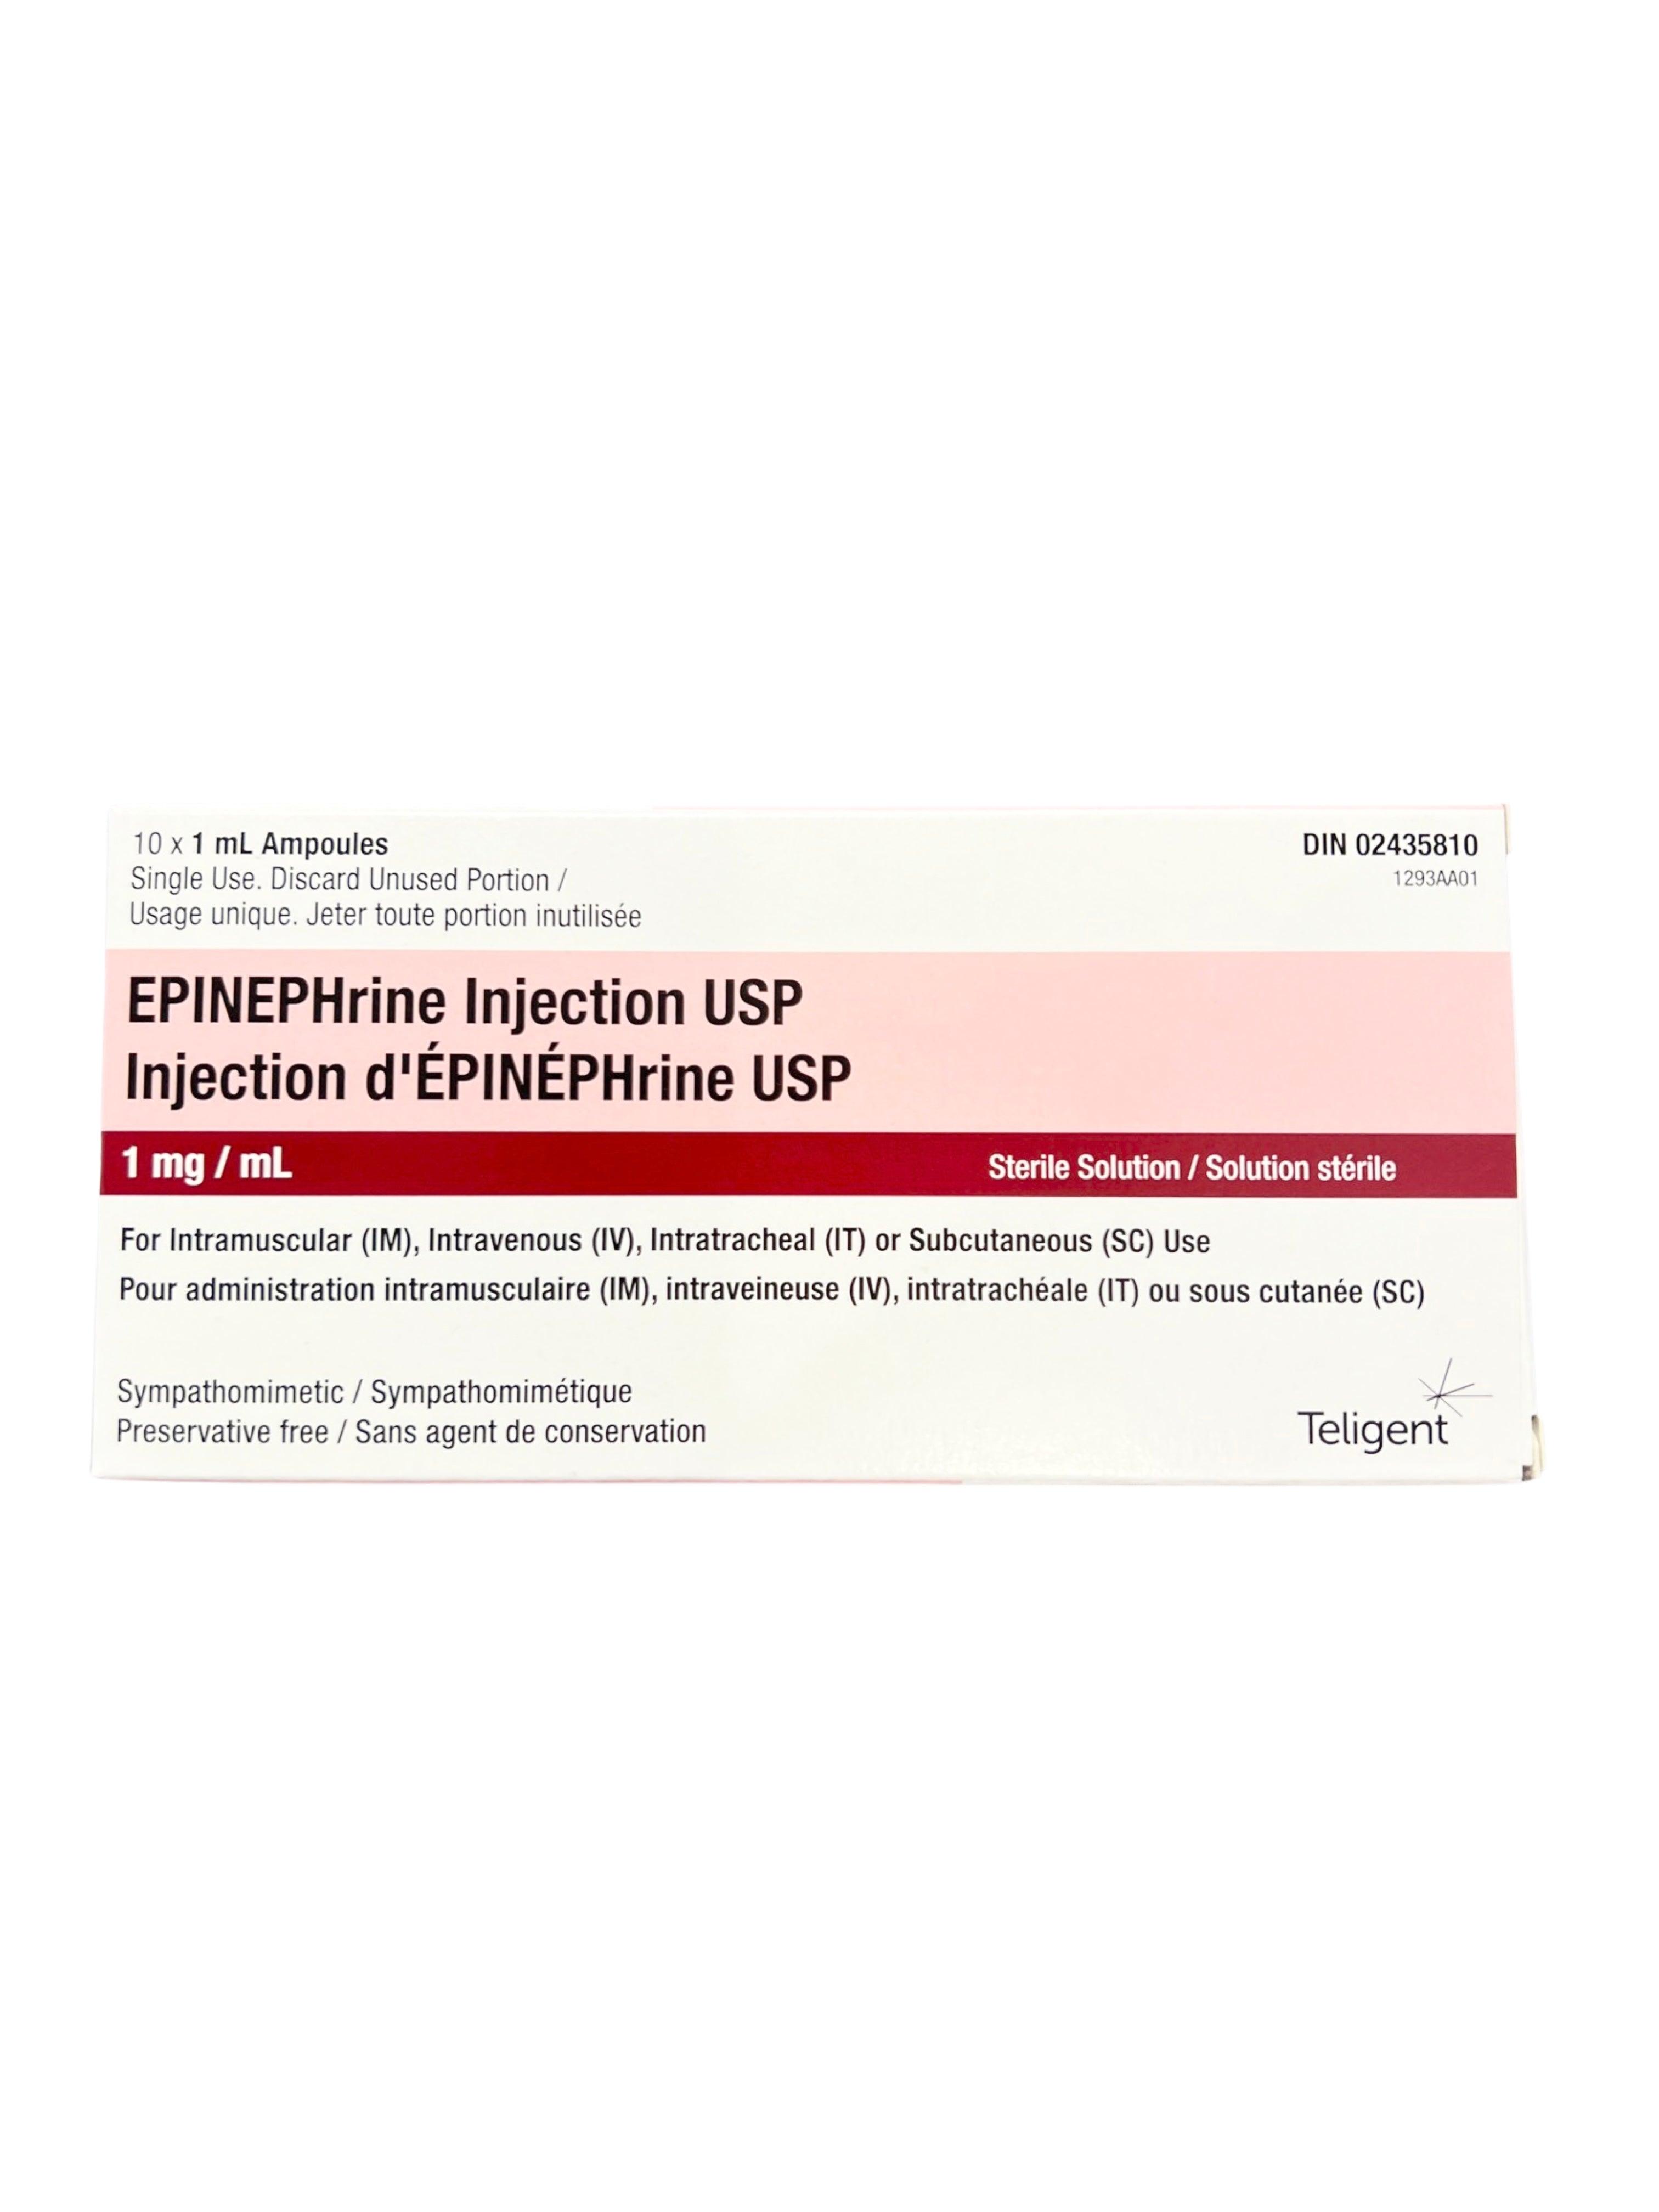 EPINEPHrine Injection USP 1mg/ml (10 x 1 mL Sterile Ampoules)